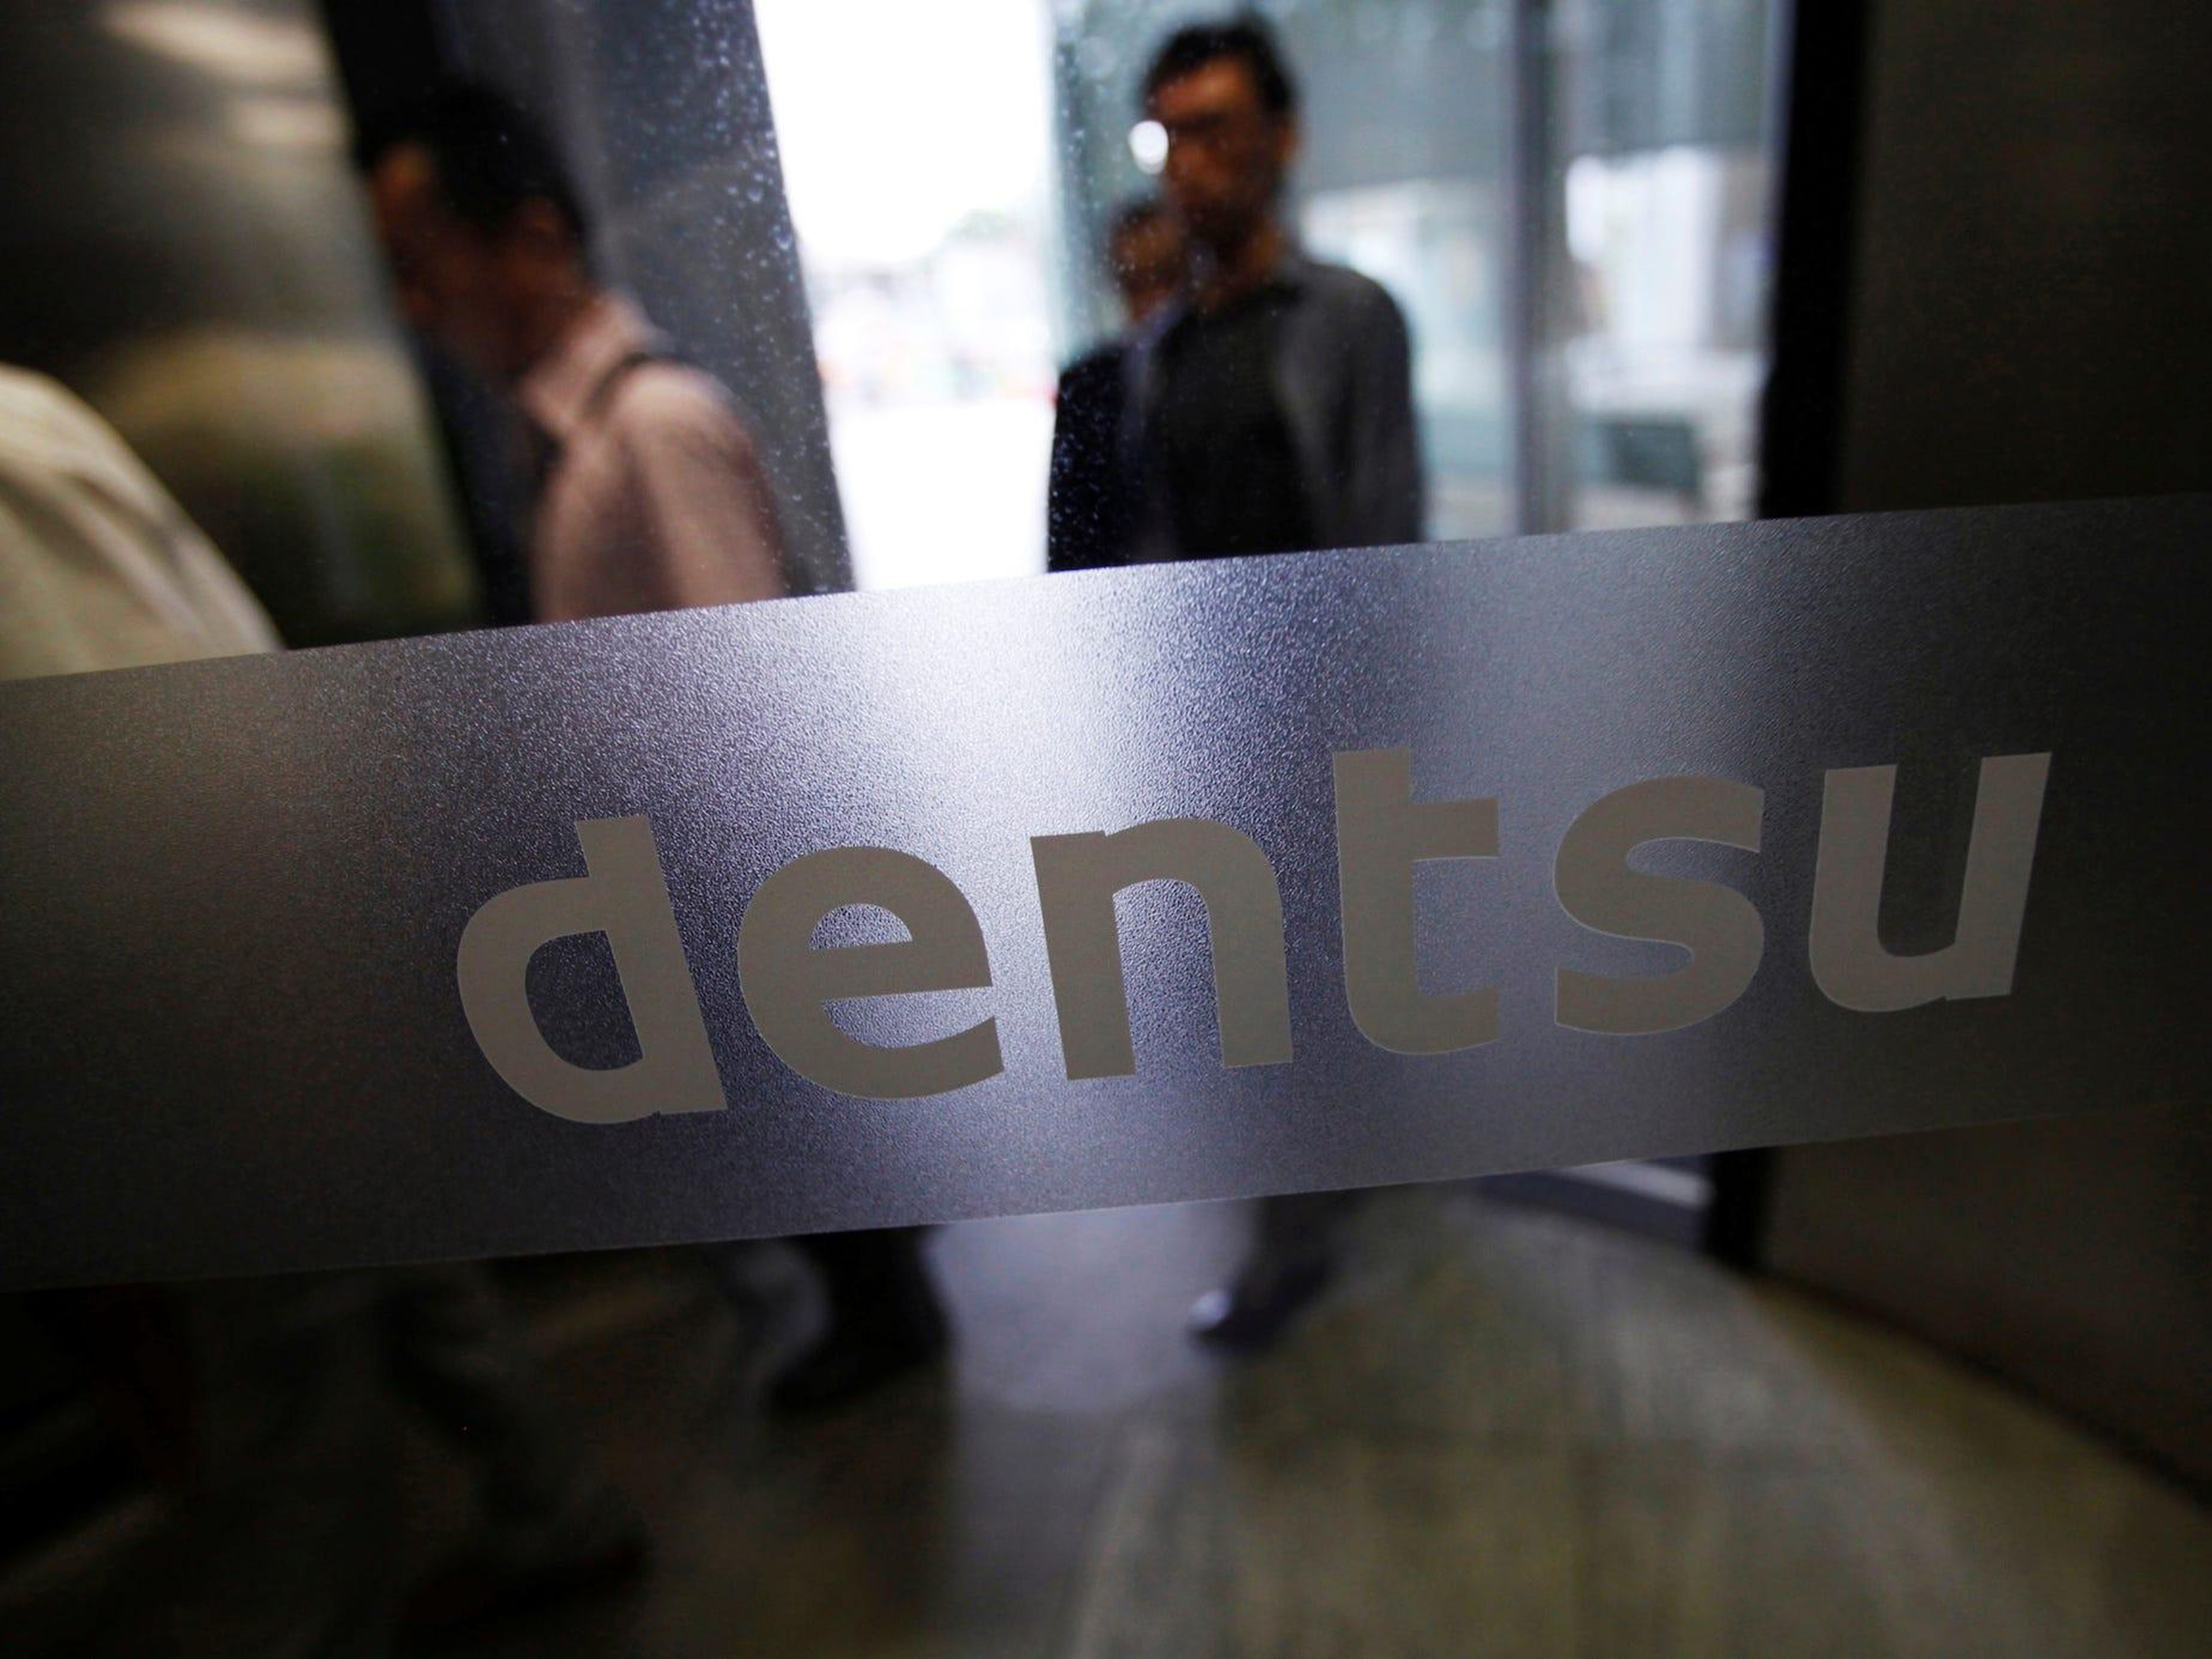 Dentsu, a prominent Japanese advertising agency, told all of its employees in the Tokyo headquarters to work from home after one employee tested positive for the virus.